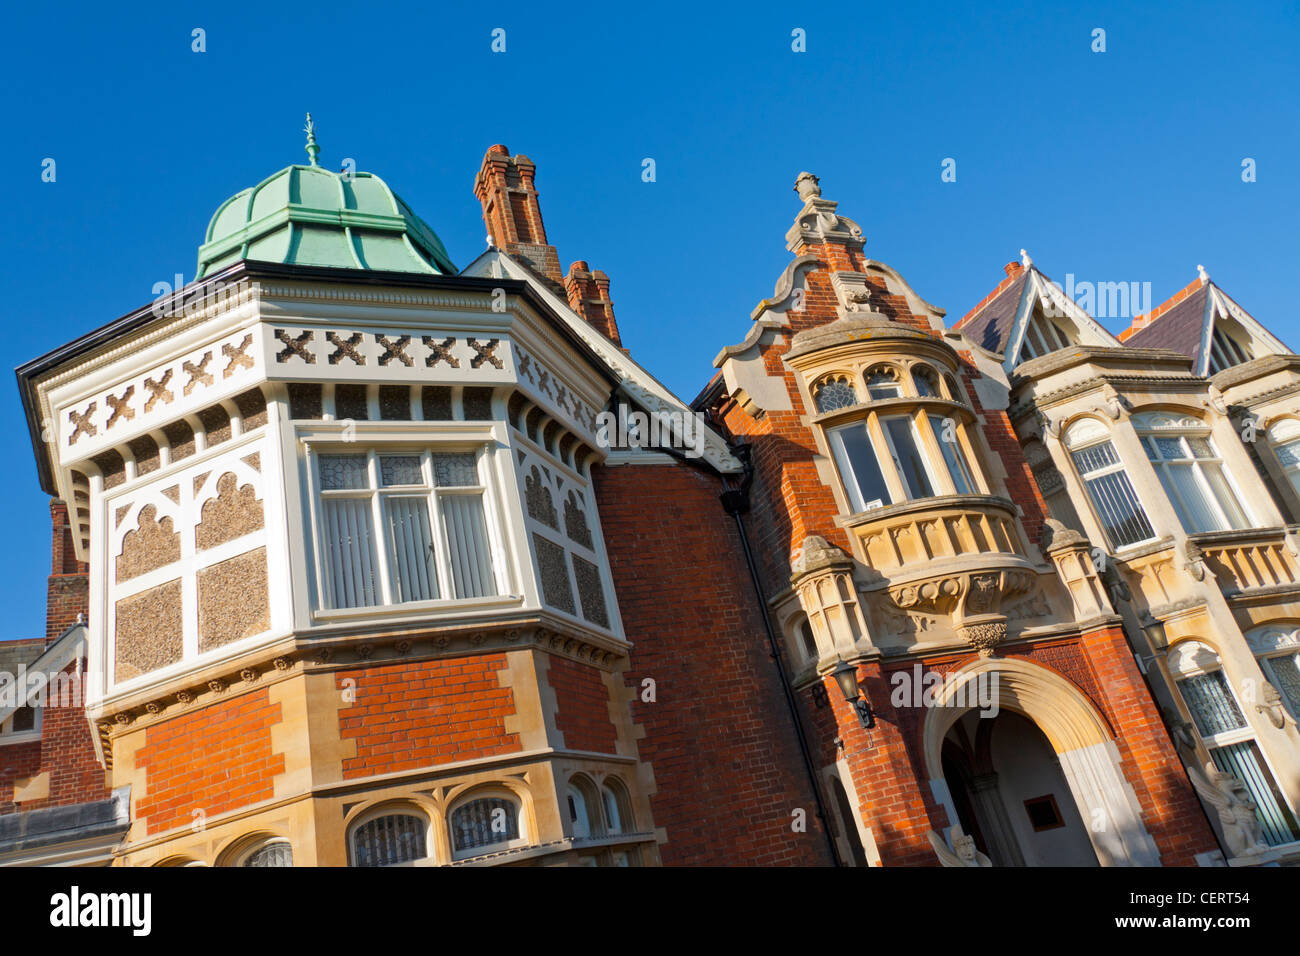 The facade of Bletchley Park Mansion in Buckinghamshire, England. The home of British code breakers during World War Two. Stock Photo